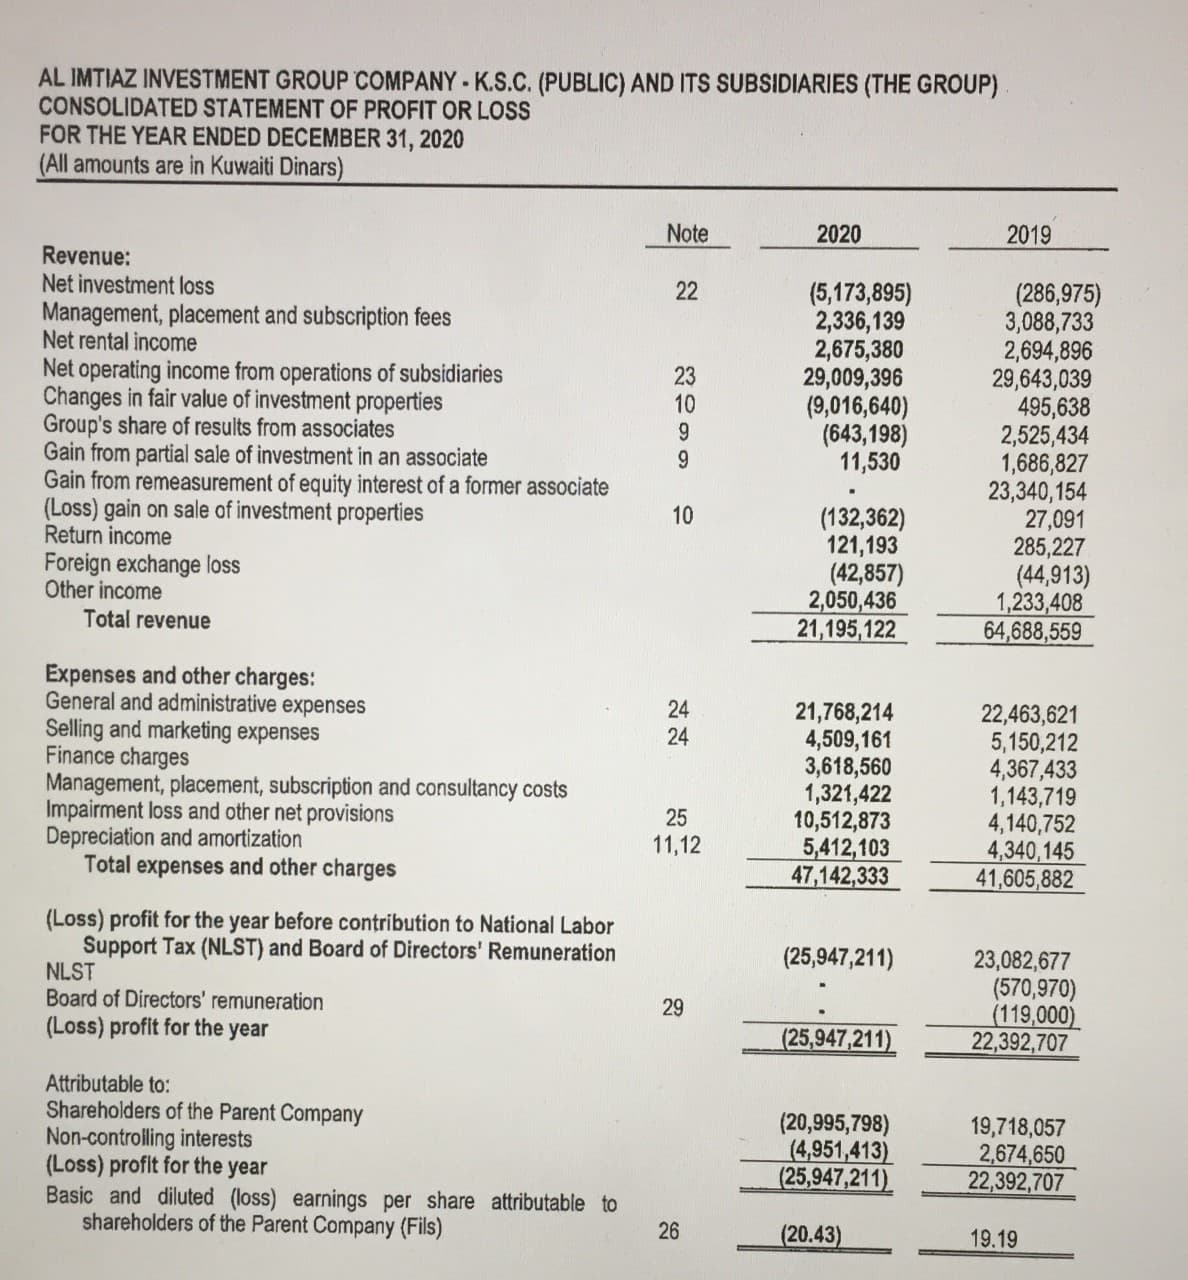 AL IMTIAZ INVESTMENT GROUP COMPANY -K.S.C. (PUBLIC) AND ITS SUBSIDIARIES (THE GROUP)
CONSOLIDATED STATEMENT OF PROFIT OR LOSS
FOR THE YEAR ENDED DECEMBER 31, 2020
(All amounts are in Kuwaiti Dinars)
Note
2020
2019
Revenue:
Net investment loss
22
(5,173,895)
2,336,139
2,675,380
29,009,396
(9,016,640)
(643,198)
11,530
(286,975)
3,088,733
2,694,896
29,643,039
495,638
2,525,434
1,686,827
23,340,154
27,091
285,227
(44,913)
1,233,408
64,688,559
Management, placement and subscription fees
Net rental income
Net operating income from operations of subsidiaries
Changes in fair value of investment properties
Group's share of results from associates
Gain from partial sale of investment in an associate
Gain from remeasurement of equity interest of a former associate
(Loss) gain on sale of investment properties
Return income
23
10
9.
10
(132,362)
121,193
(42,857)
2,050,436
21,195,122
Foreign exchange loss
Other income
Total revenue
Expenses and other charges:
General and administrative expenses
Selling and marketing expenses
Finance charges
Management, placement, subscription and consultancy costs
Impairment loss and other net provisions
Depreciation and amortization
Total expenses and other charges
24
21,768,214
4,509,161
3,618,560
1,321,422
10,512,873
5,412,103
47,142,333
22,463,621
5,150,212
4,367,433
1,143,719
4,140,752
4,340,145
41,605,882
24
25
11,12
(Loss) profit for the year before contribution to National Labor
Support Tax (NLST) and Board of Directors' Remuneration
NLST
Board of Directors' remuneration
(Loss) profit for the year
(25,947,211)
23,082,677
(570,970)
(119,000)
22,392,707
29
(25,947,211)
Attributable to:
Shareholders of the Parent Company
Non-controlling interests
(Loss) profit for the year
Basic and diluted (loss) earnings per share attributable to
shareholders of the Parent Company (Fils)
(20,995,798)
(4,951,413)
(25,947,211)
19,718,057
2,674,650
22,392,707
(20.43)
19.19
26
